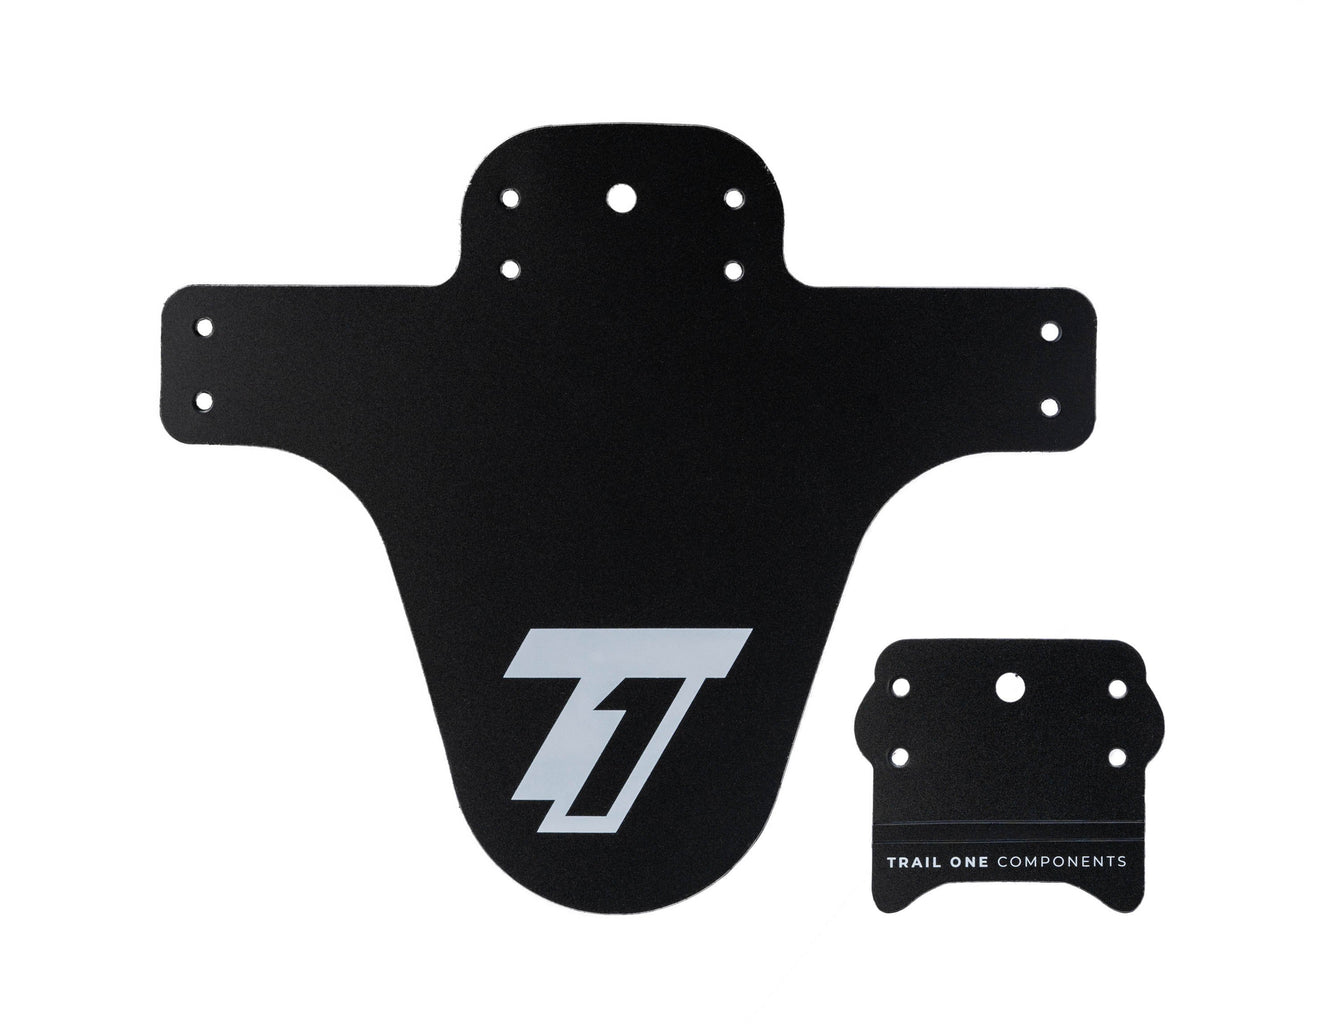 Trail One Components Fender T1 Logo MPN: 2015-1 Clip-On Fender T1 Fender